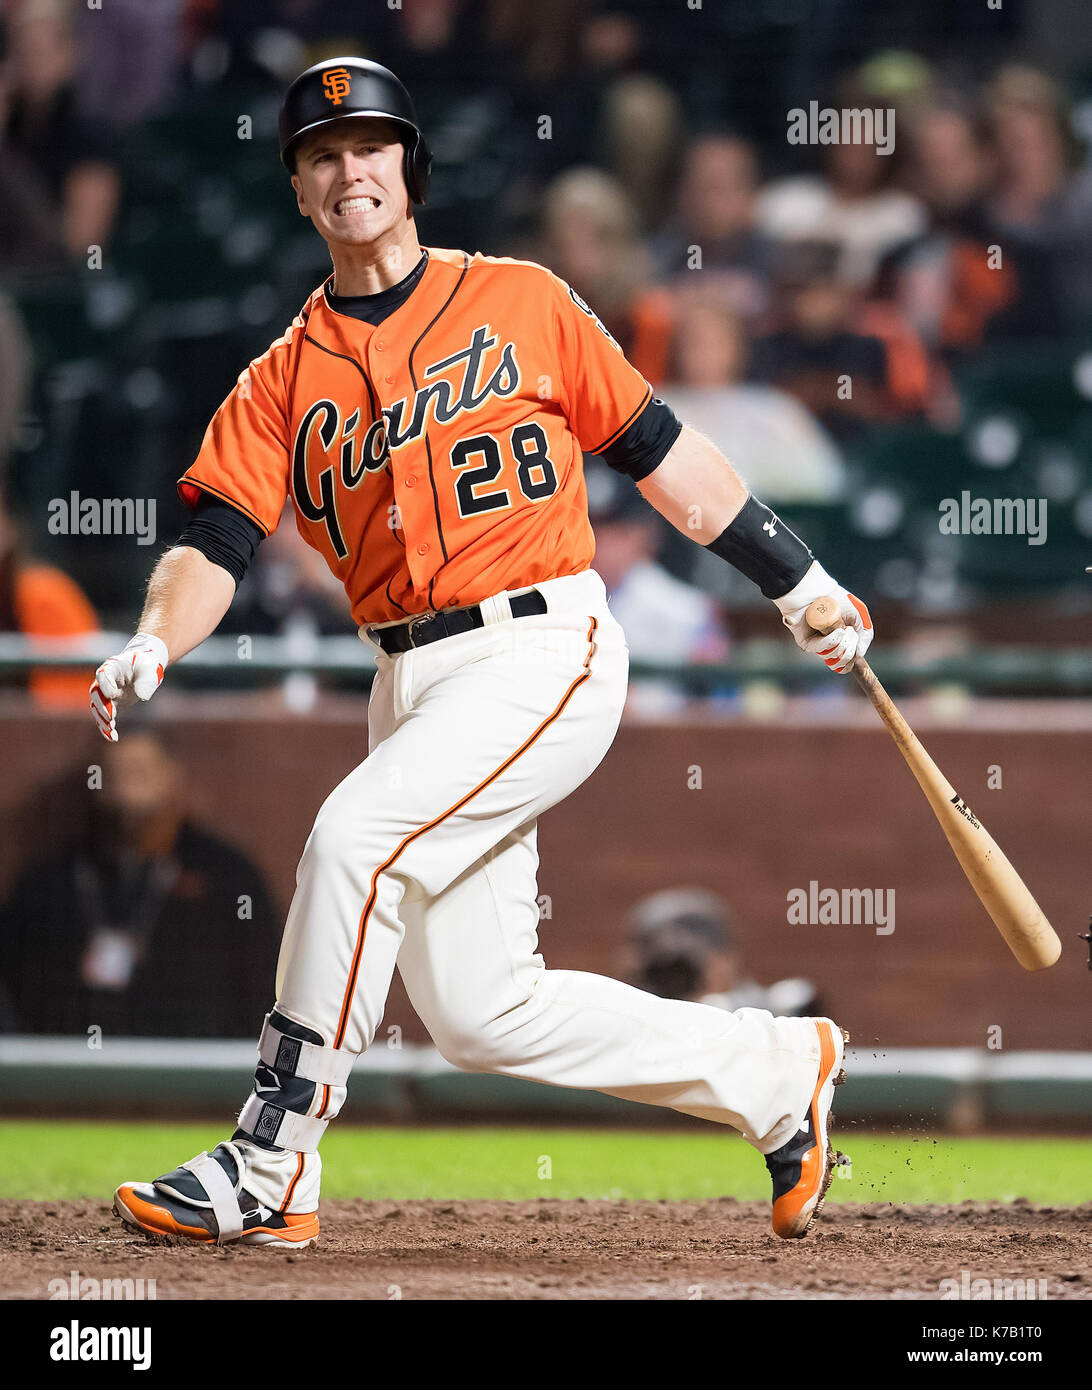 San Francisco, California, USA. 15th Sep, 2017. San Francisco Giants first baseman Buster Posey (28) reacts after striking out in the sixth inning, during a MLB game between the Arizona Diamondbacks and the San Francisco Giants at AT&T Park in San Francisco, California. Valerie Shoaps/CSM/Alamy Live News Stock Photo